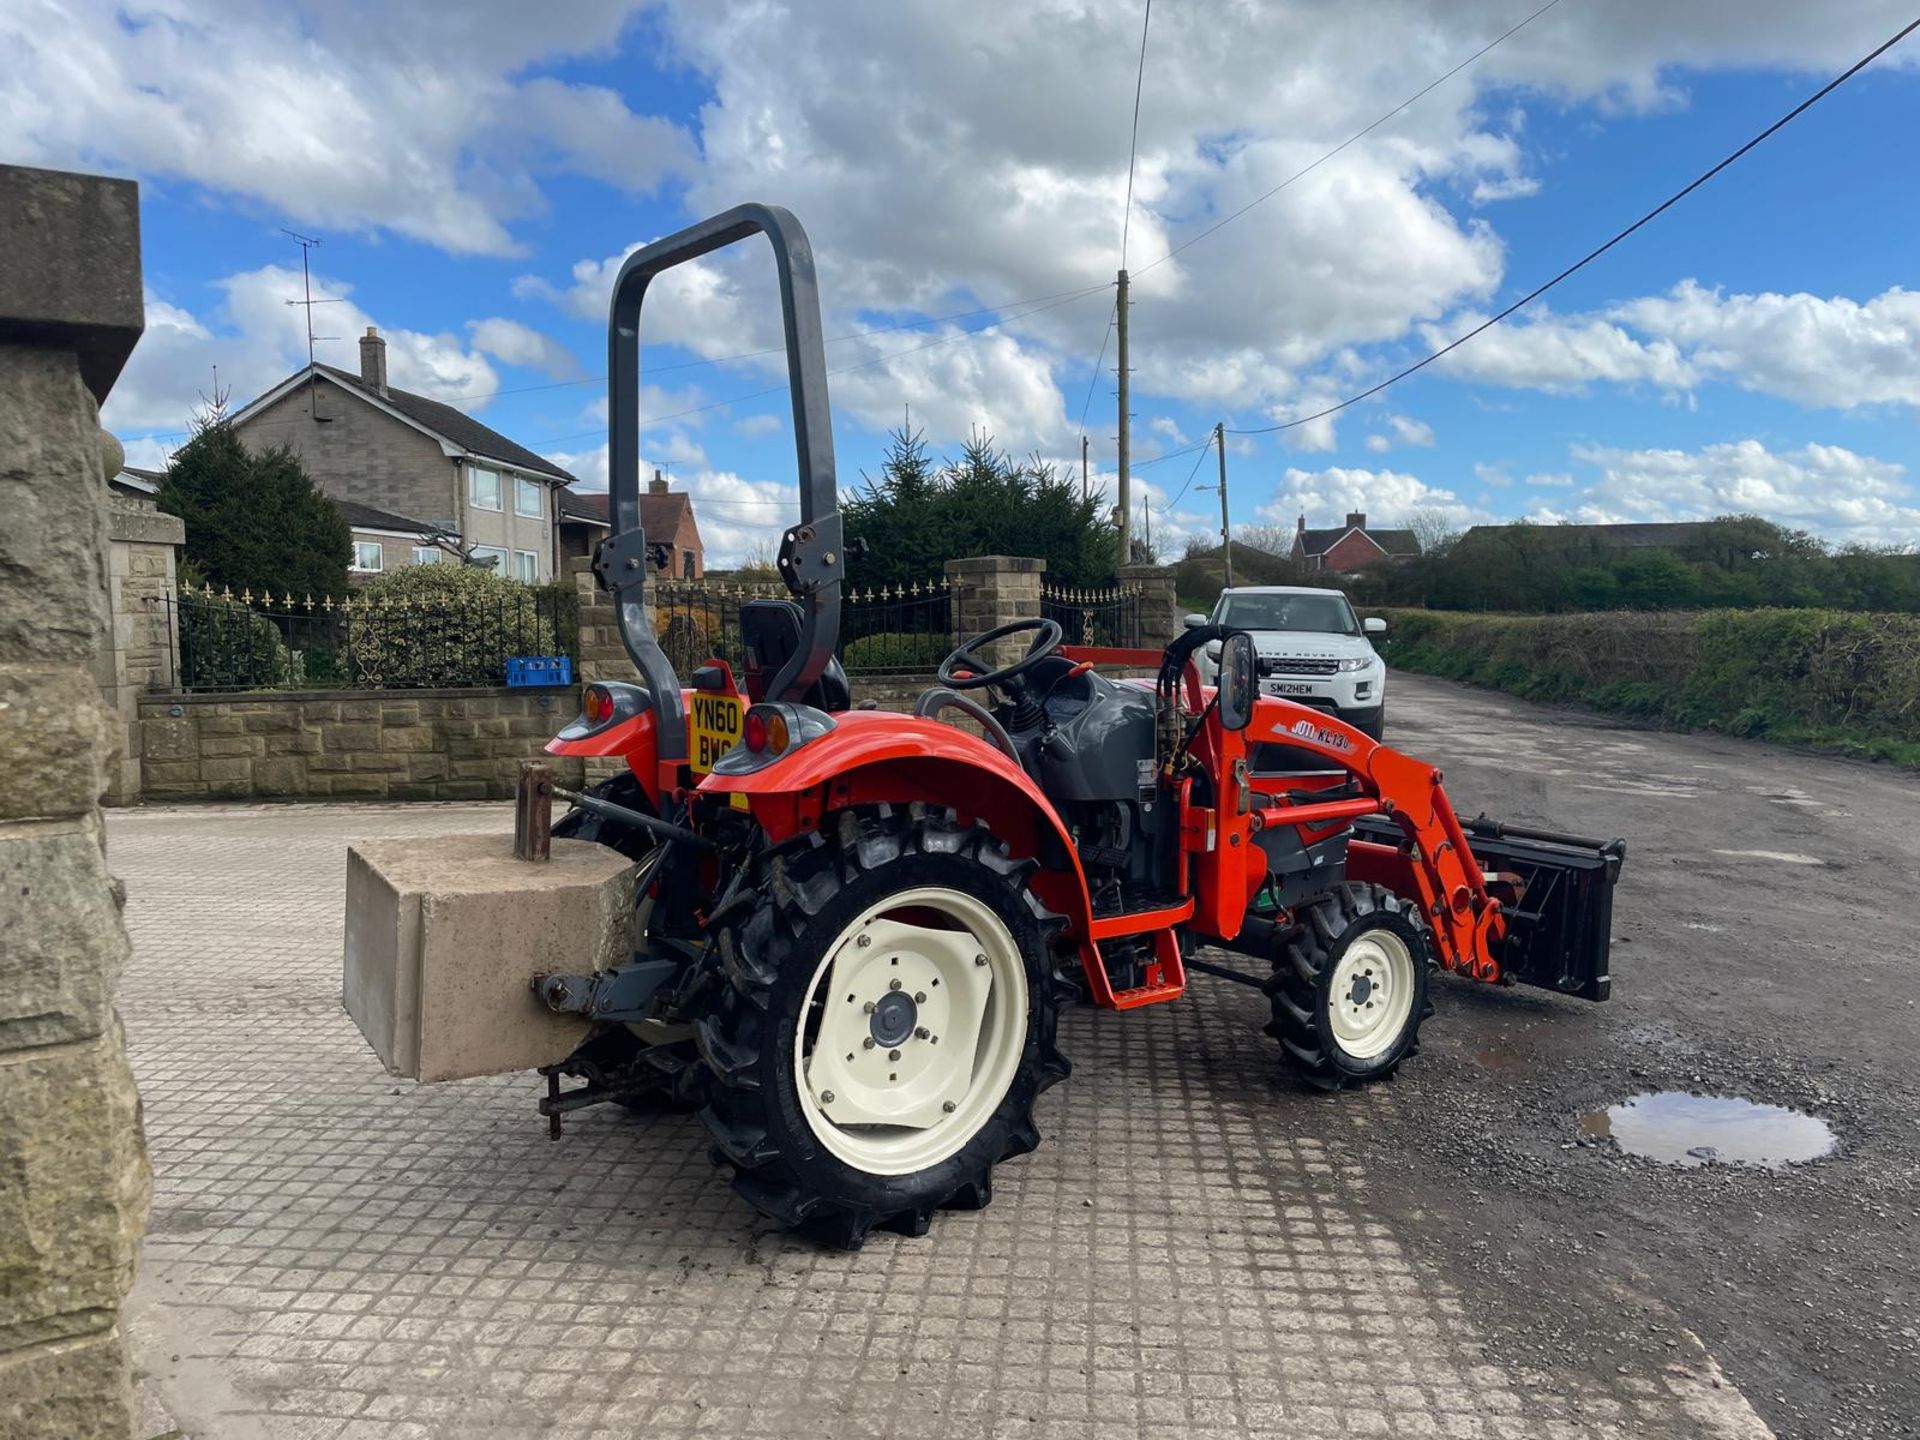 60 REG KIOTI CX27 27HP 4WD COMPACT TRACTOR WITH KIOTI KL130 FRONT LOADER AND PALLET FORKS *PLUS VAT* - Image 3 of 19